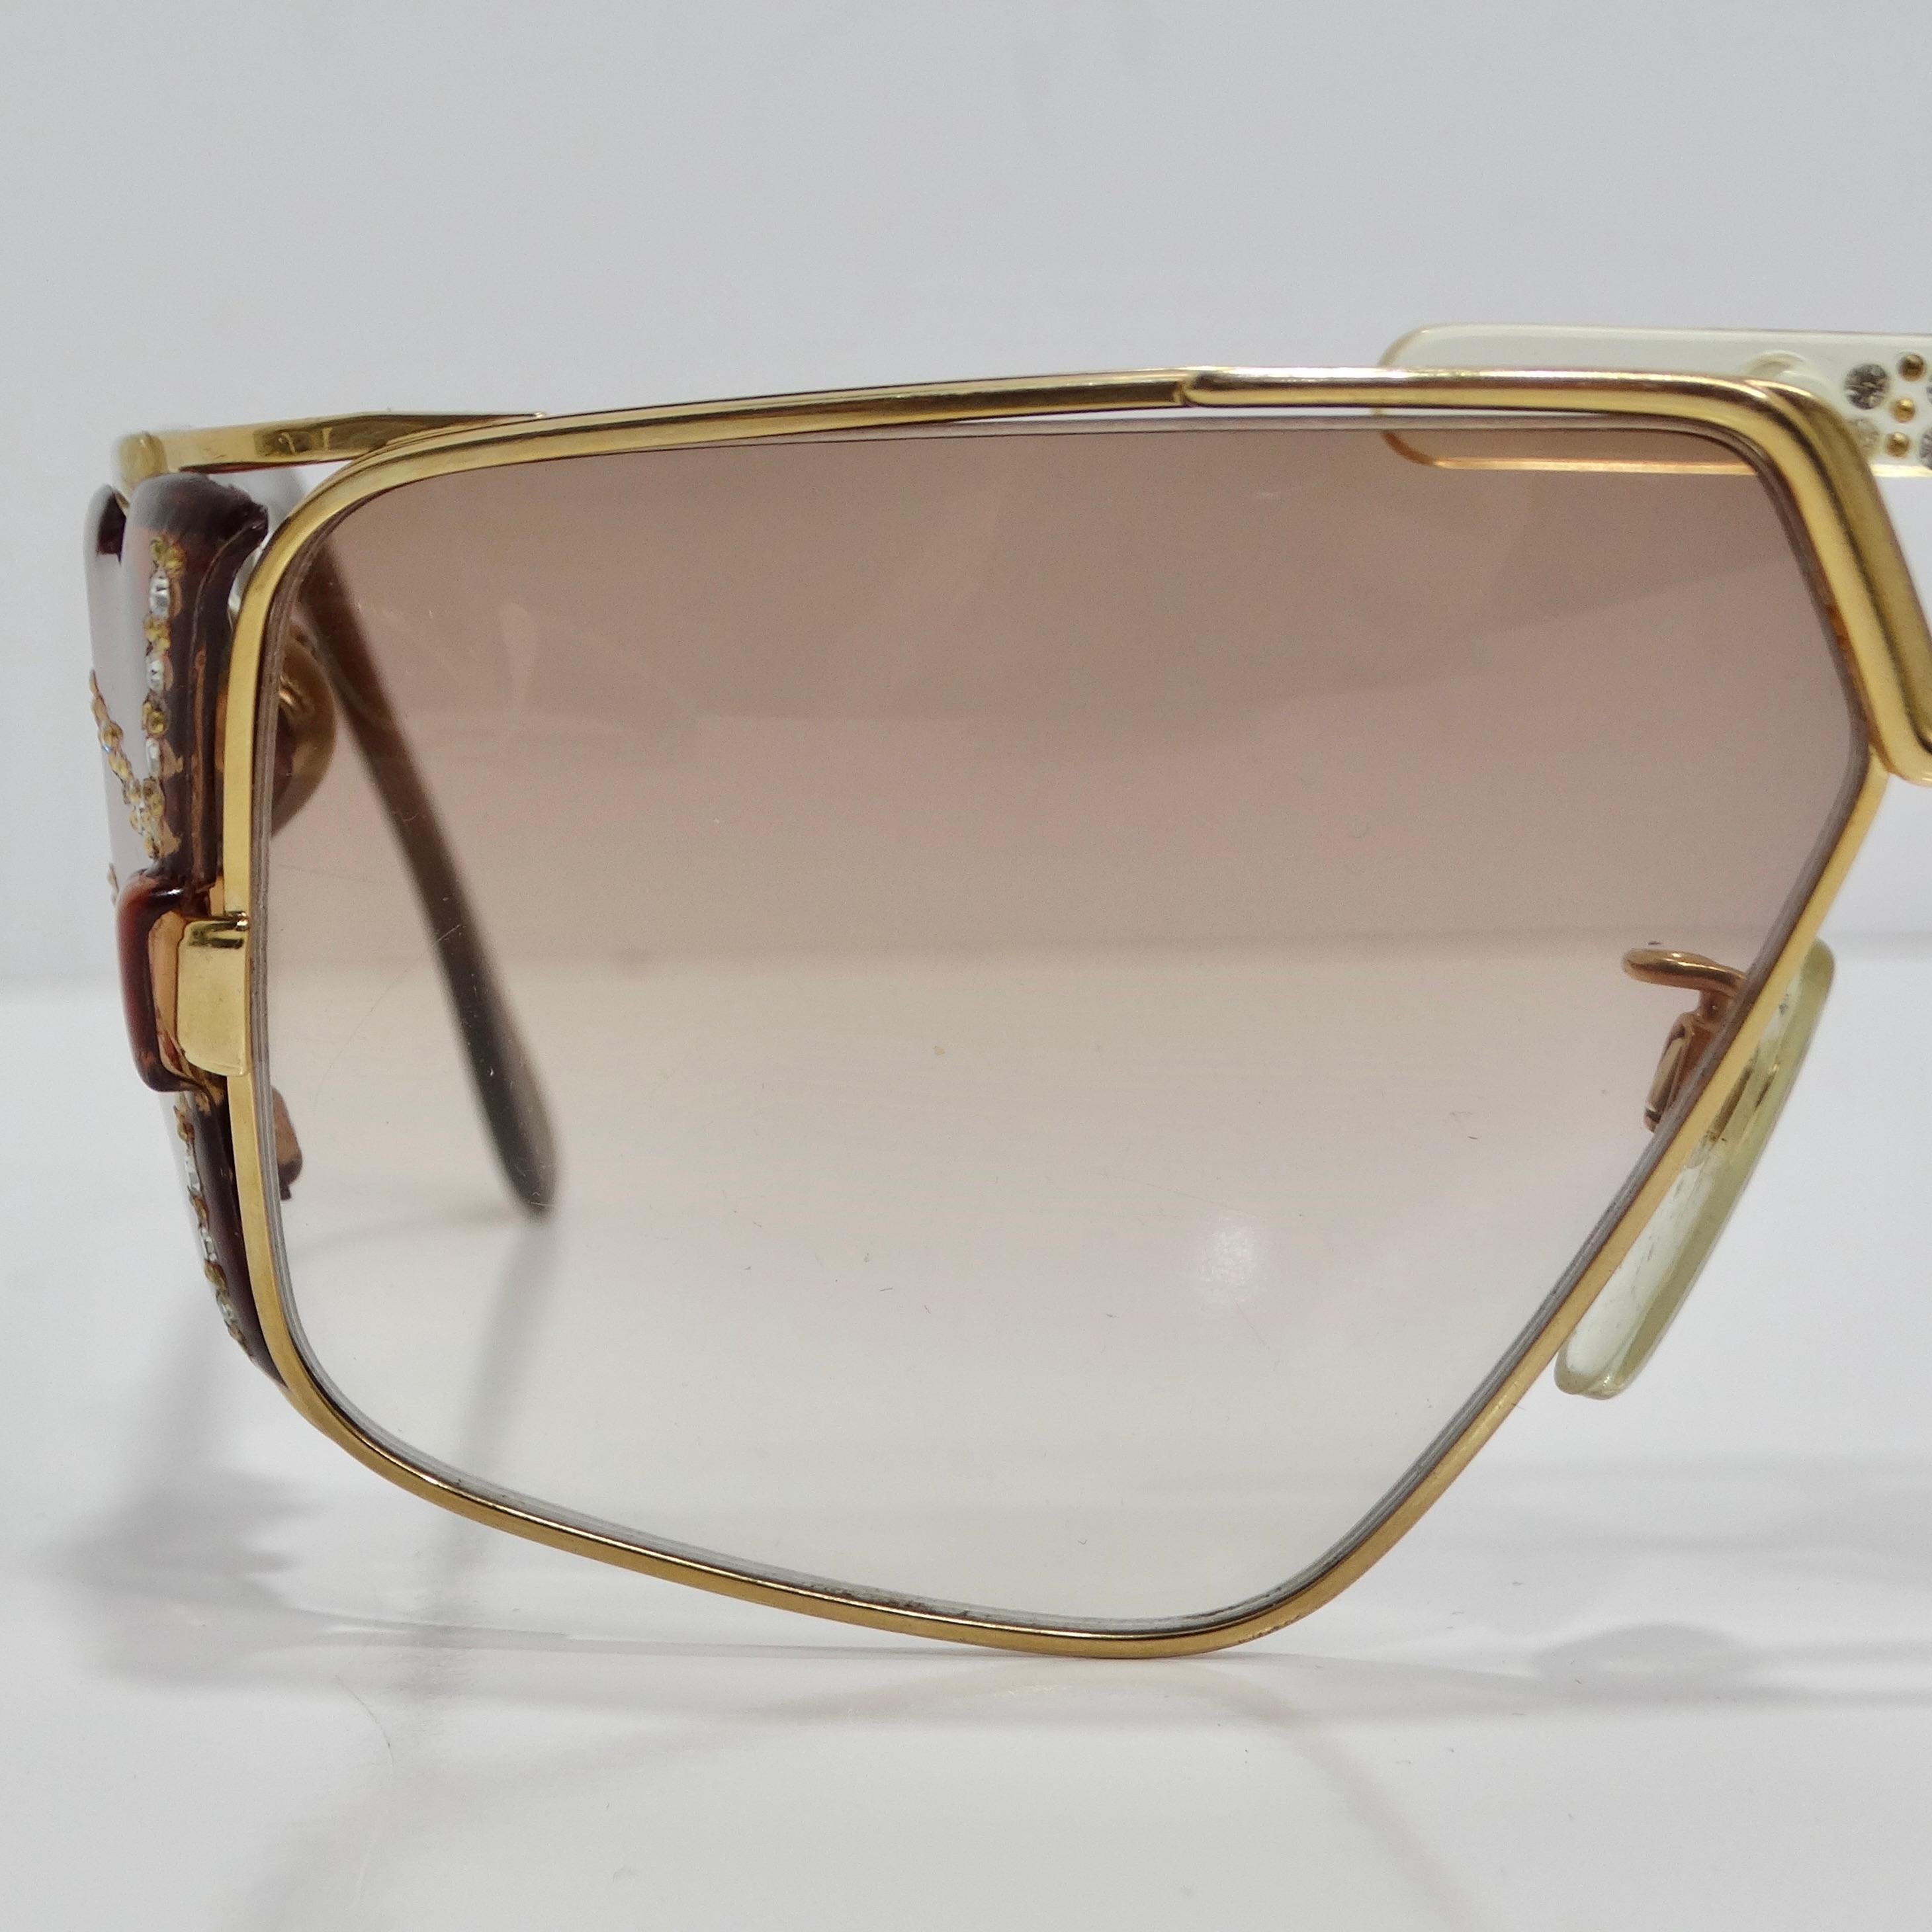 Cazal 1980s 951 Gold Tone Sunglasses In Good Condition For Sale In Scottsdale, AZ